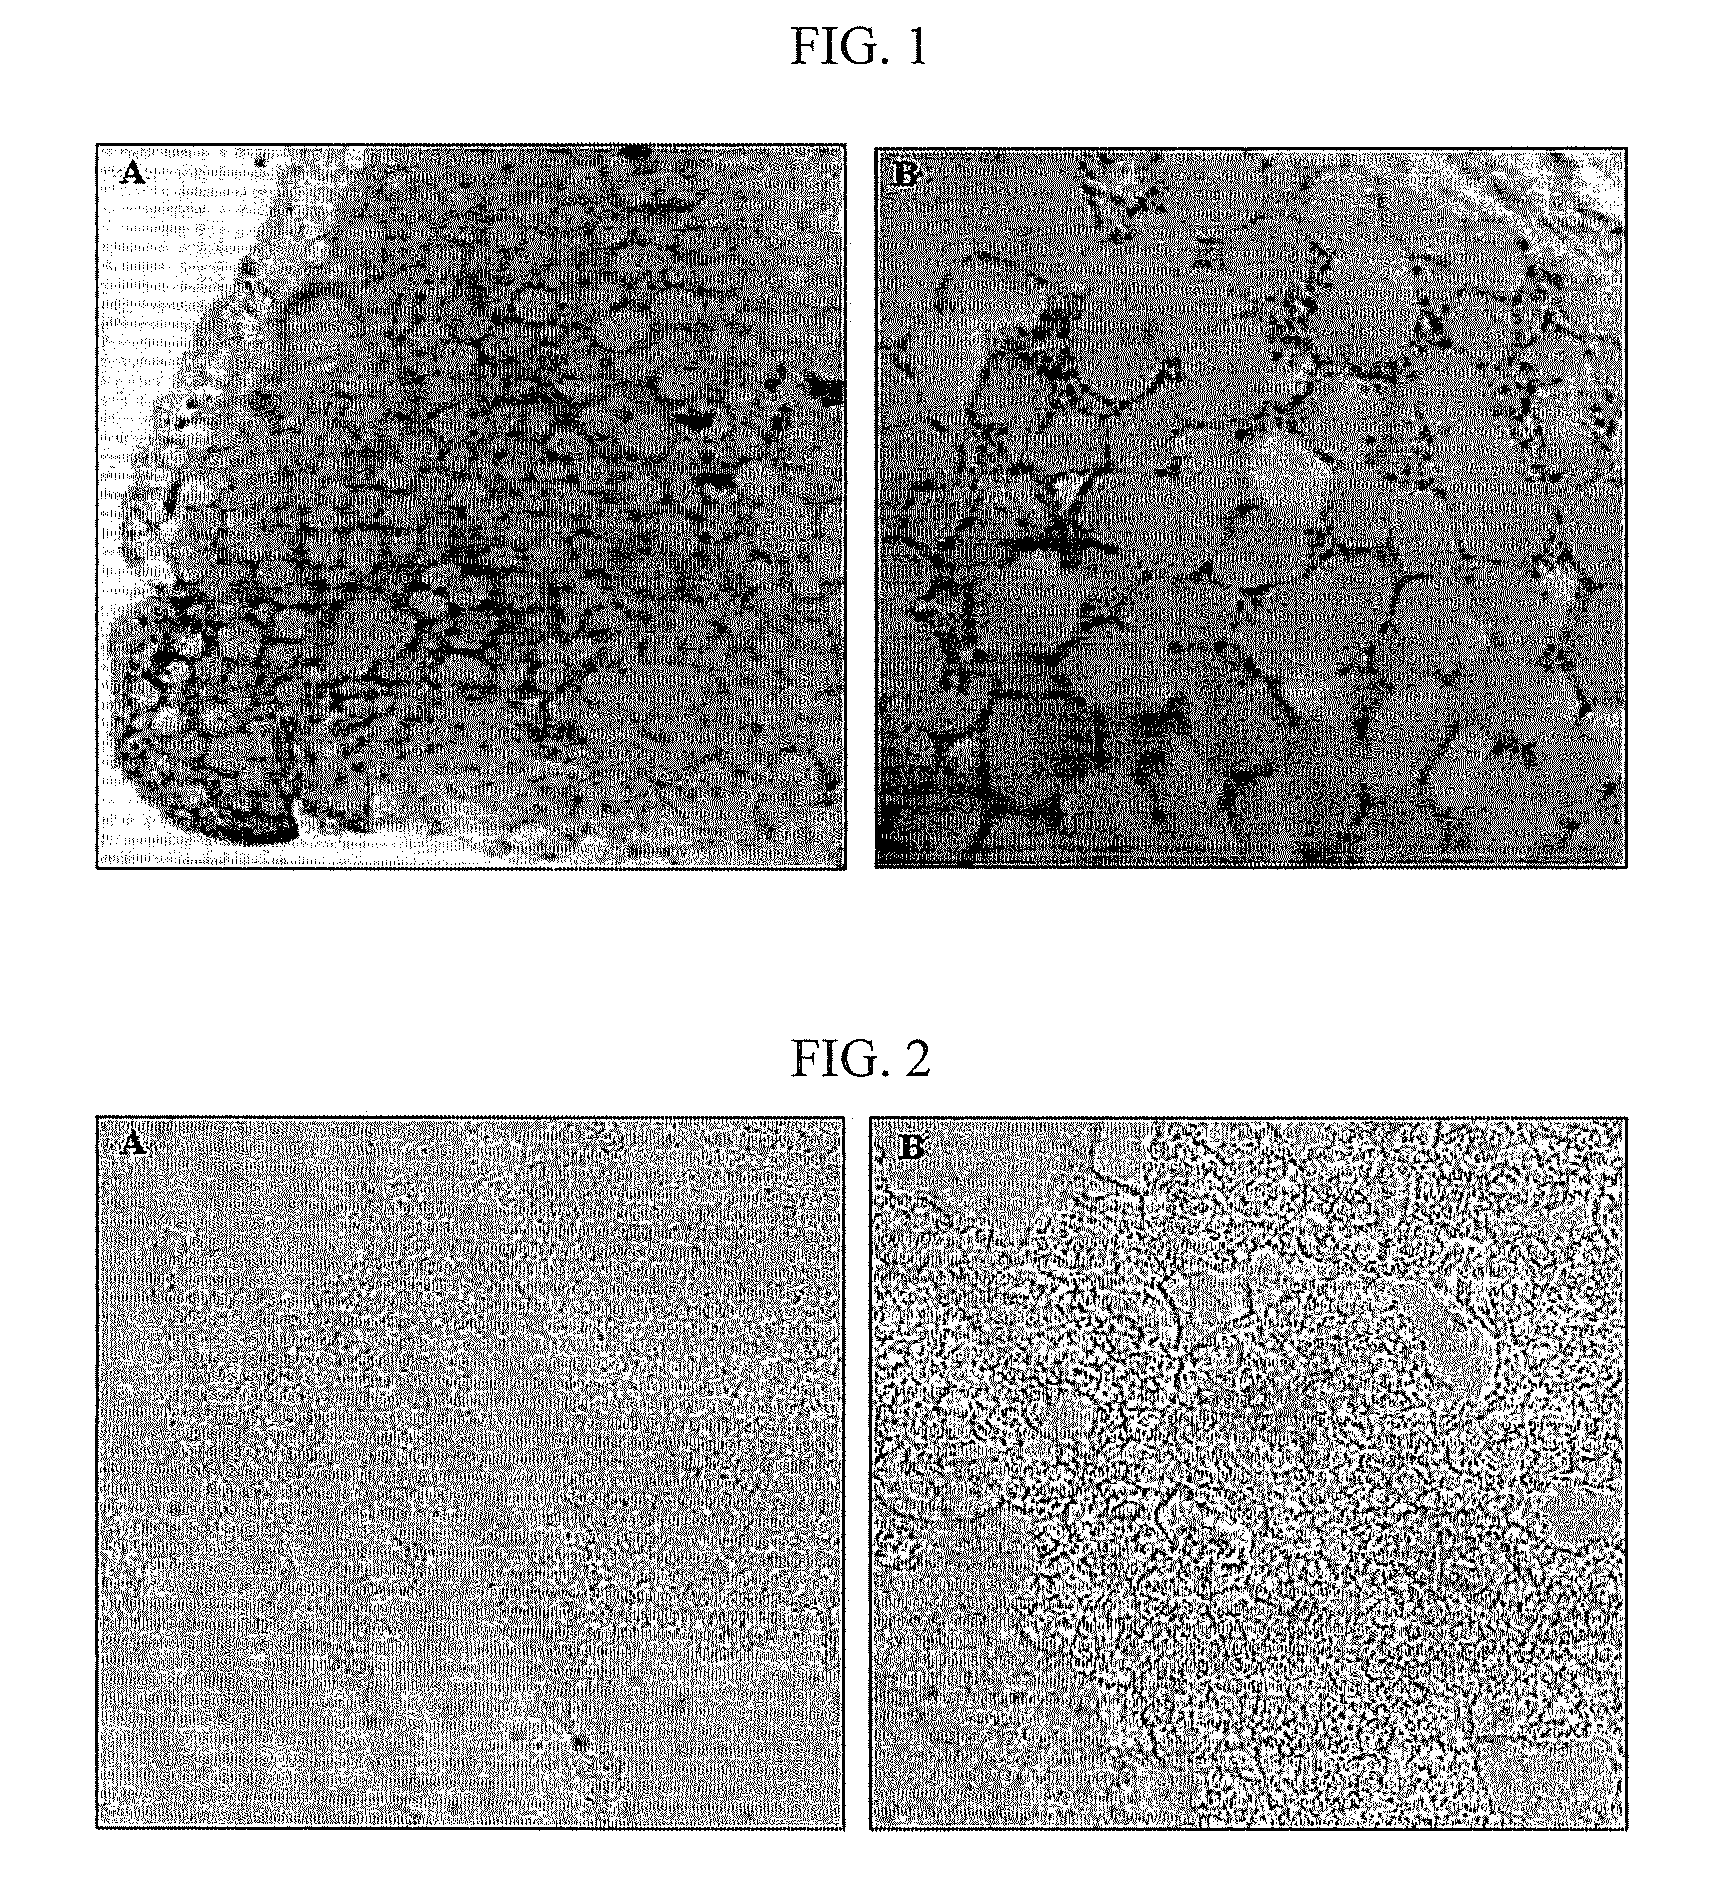 Lipid-free scaffolds for human volume replacement or cell culture and use thereof